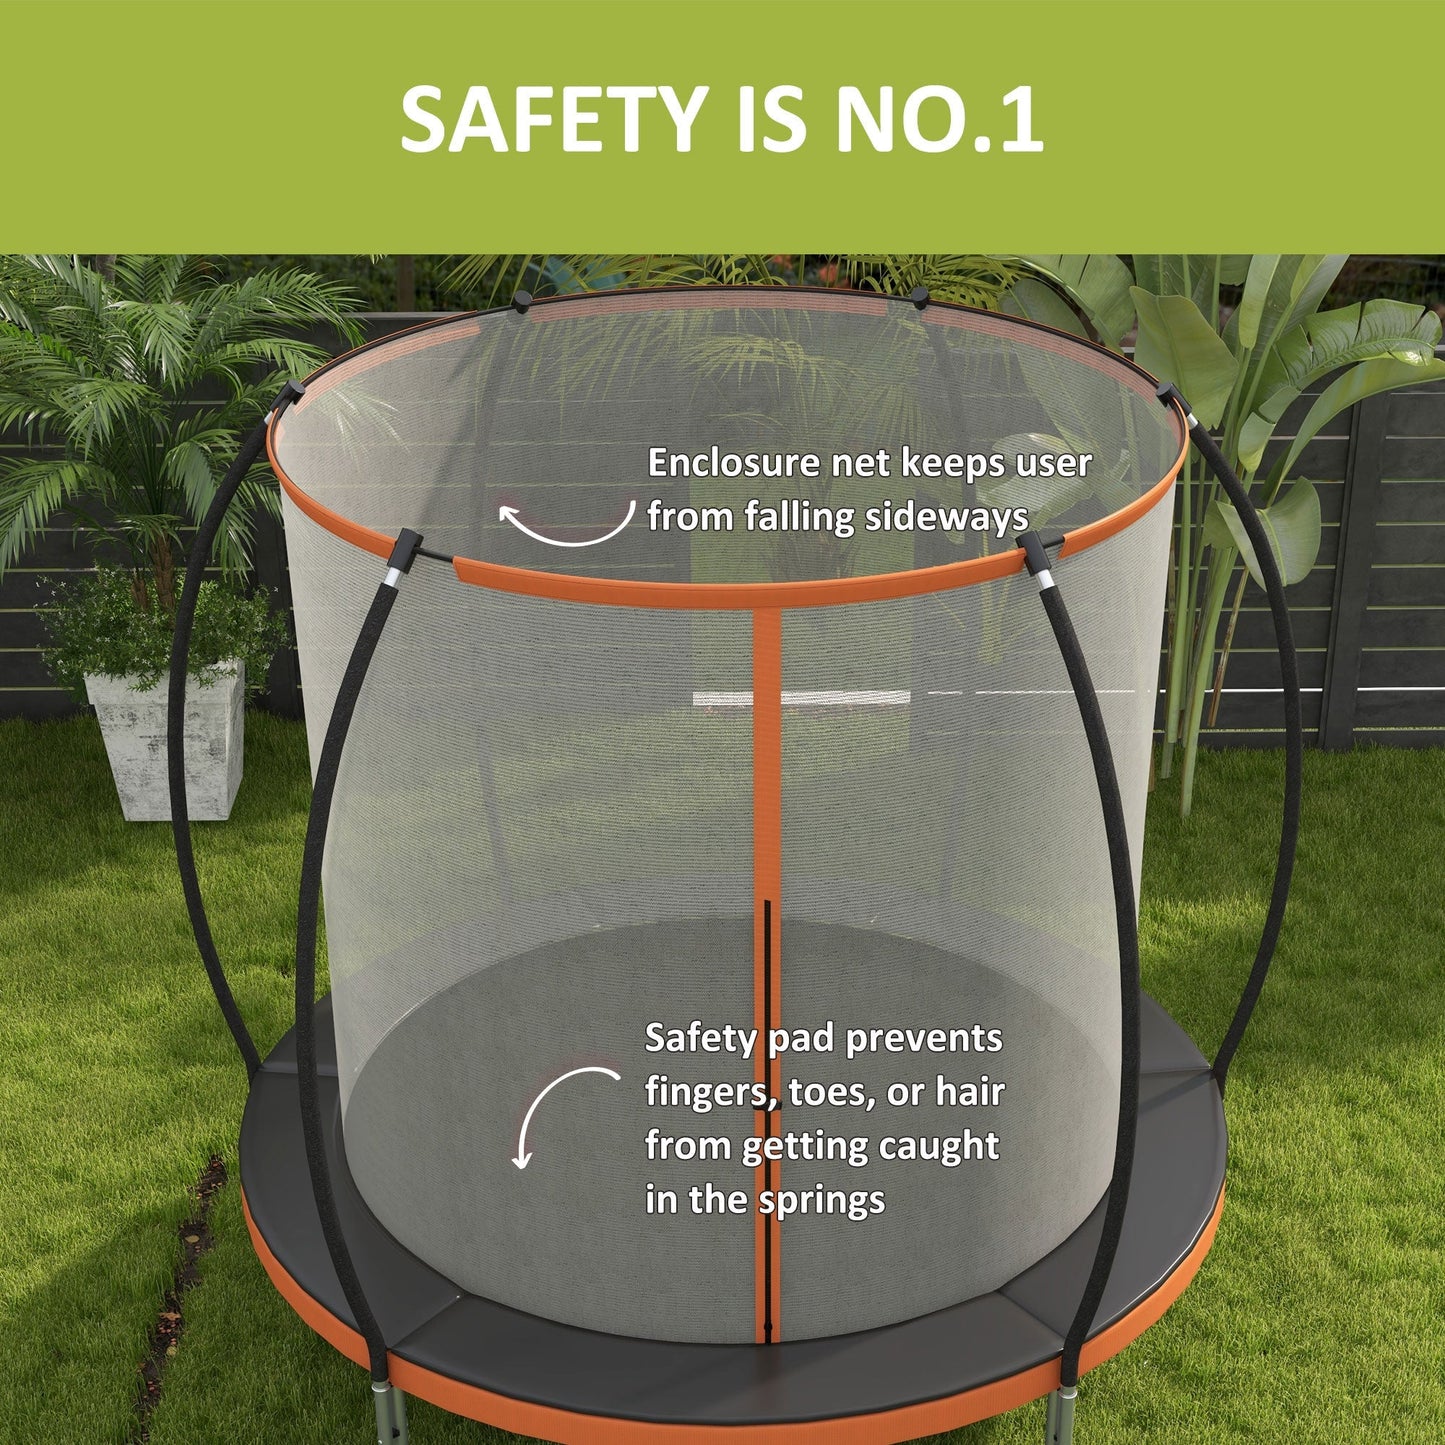 10ft Outdoor Trampoline with Enclosure Net and Ladder, Backyard Fitness Trampoline for Teens and Adults - Gallery Canada